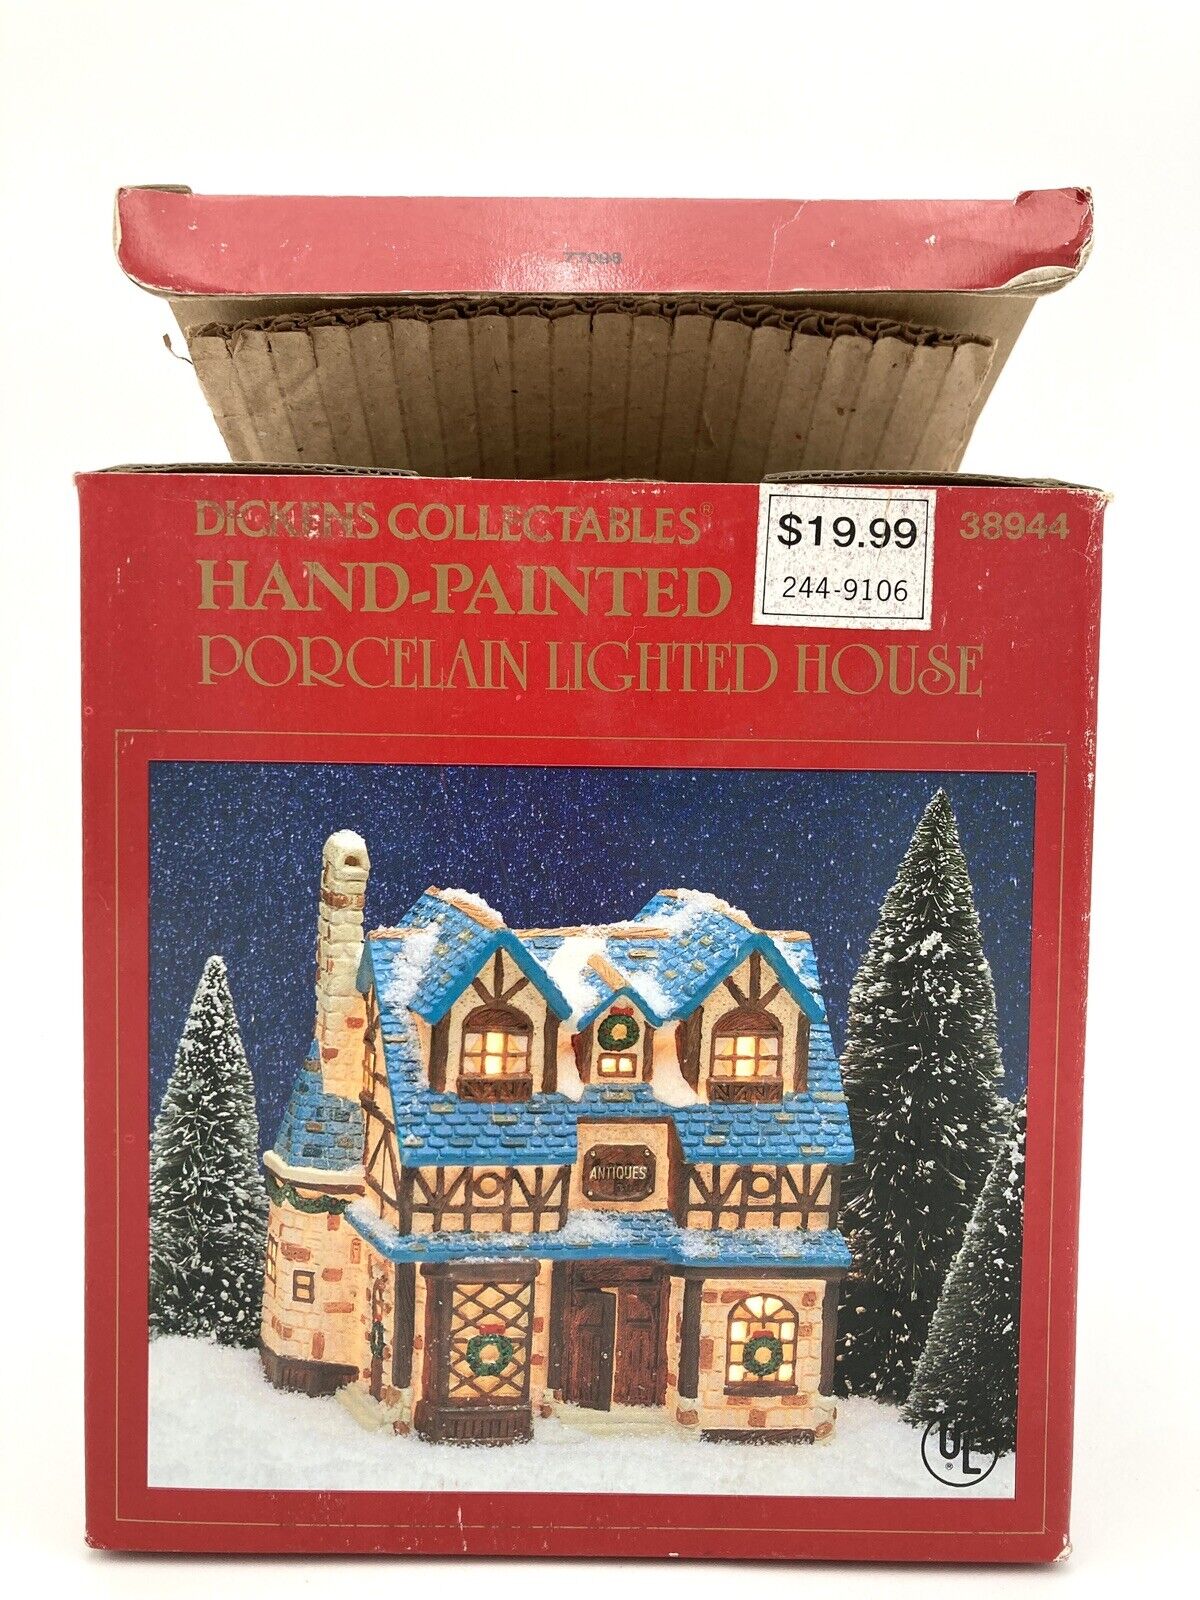 Dickens Collectibles XMas Antiques Shop Building Hand Painted Porcelain 38944